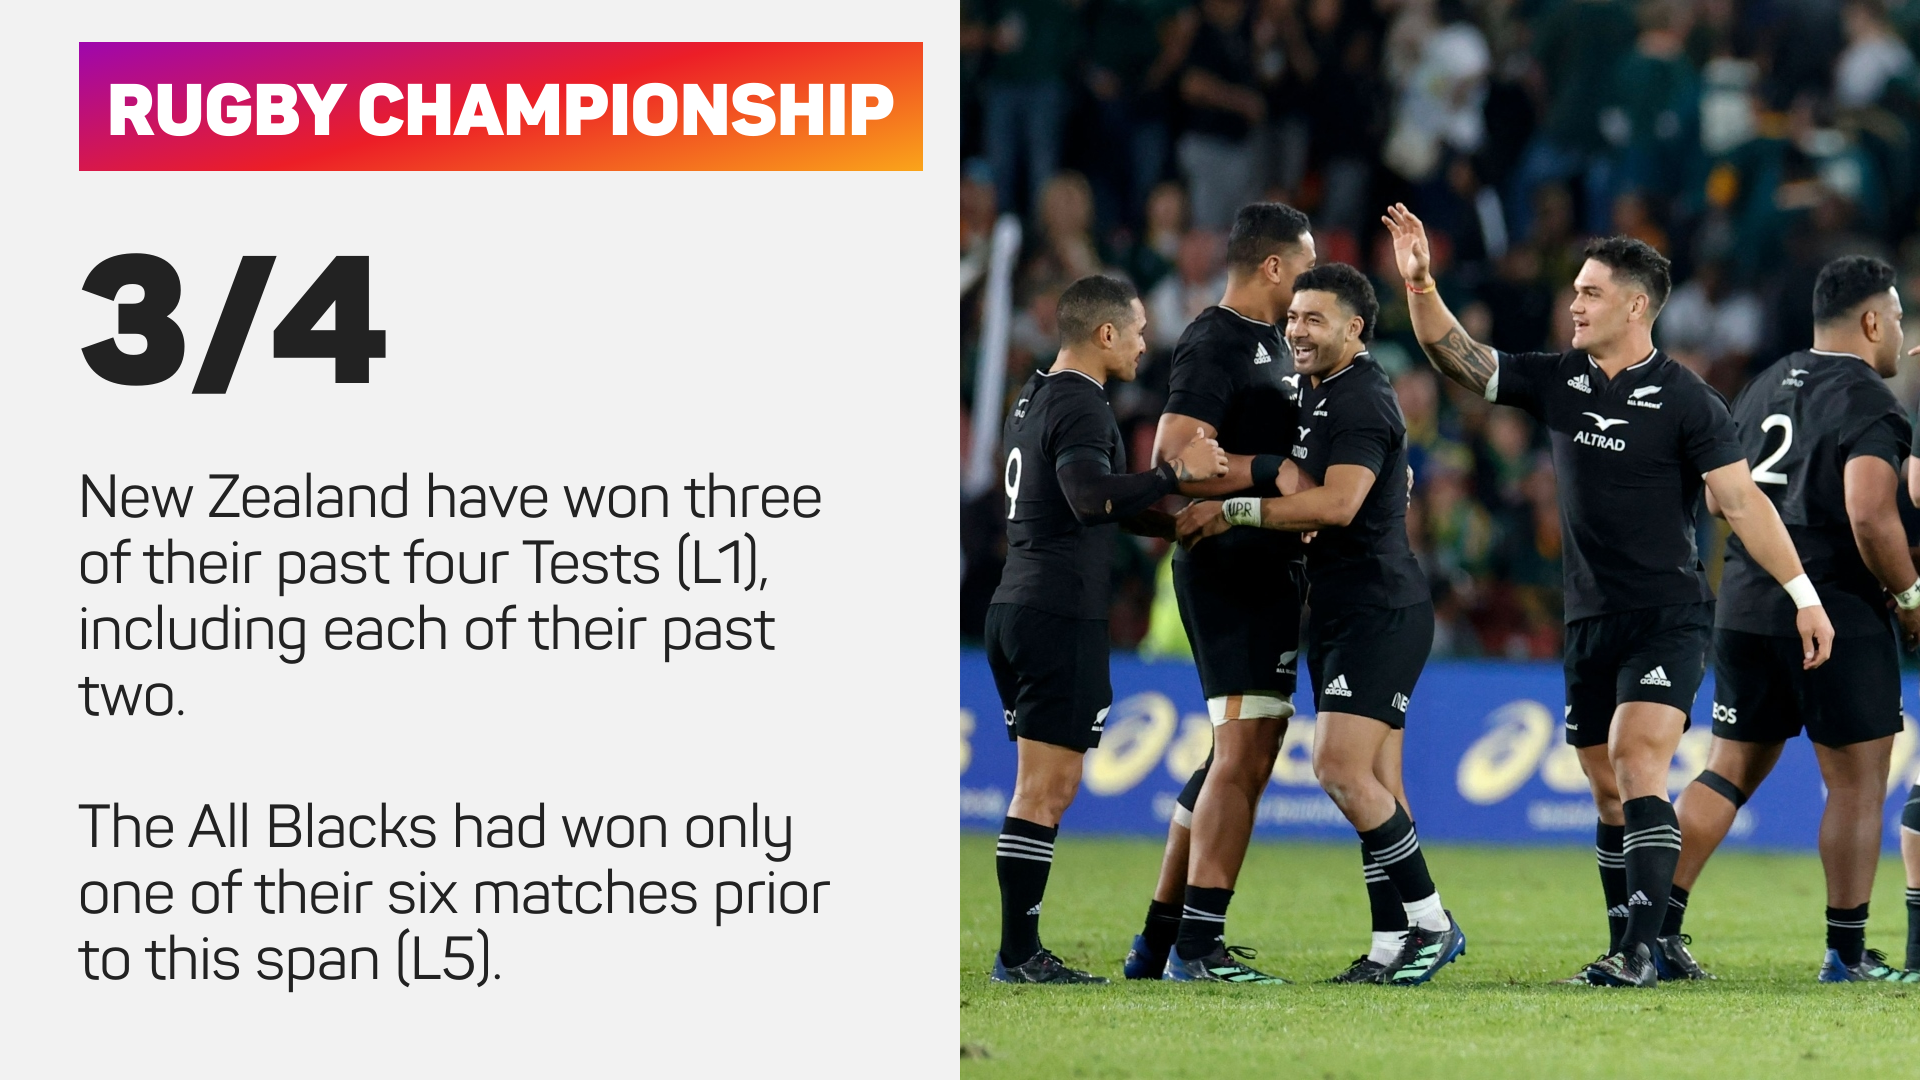 New Zealand have won three of their past four Tests (L1), including each of their past two.